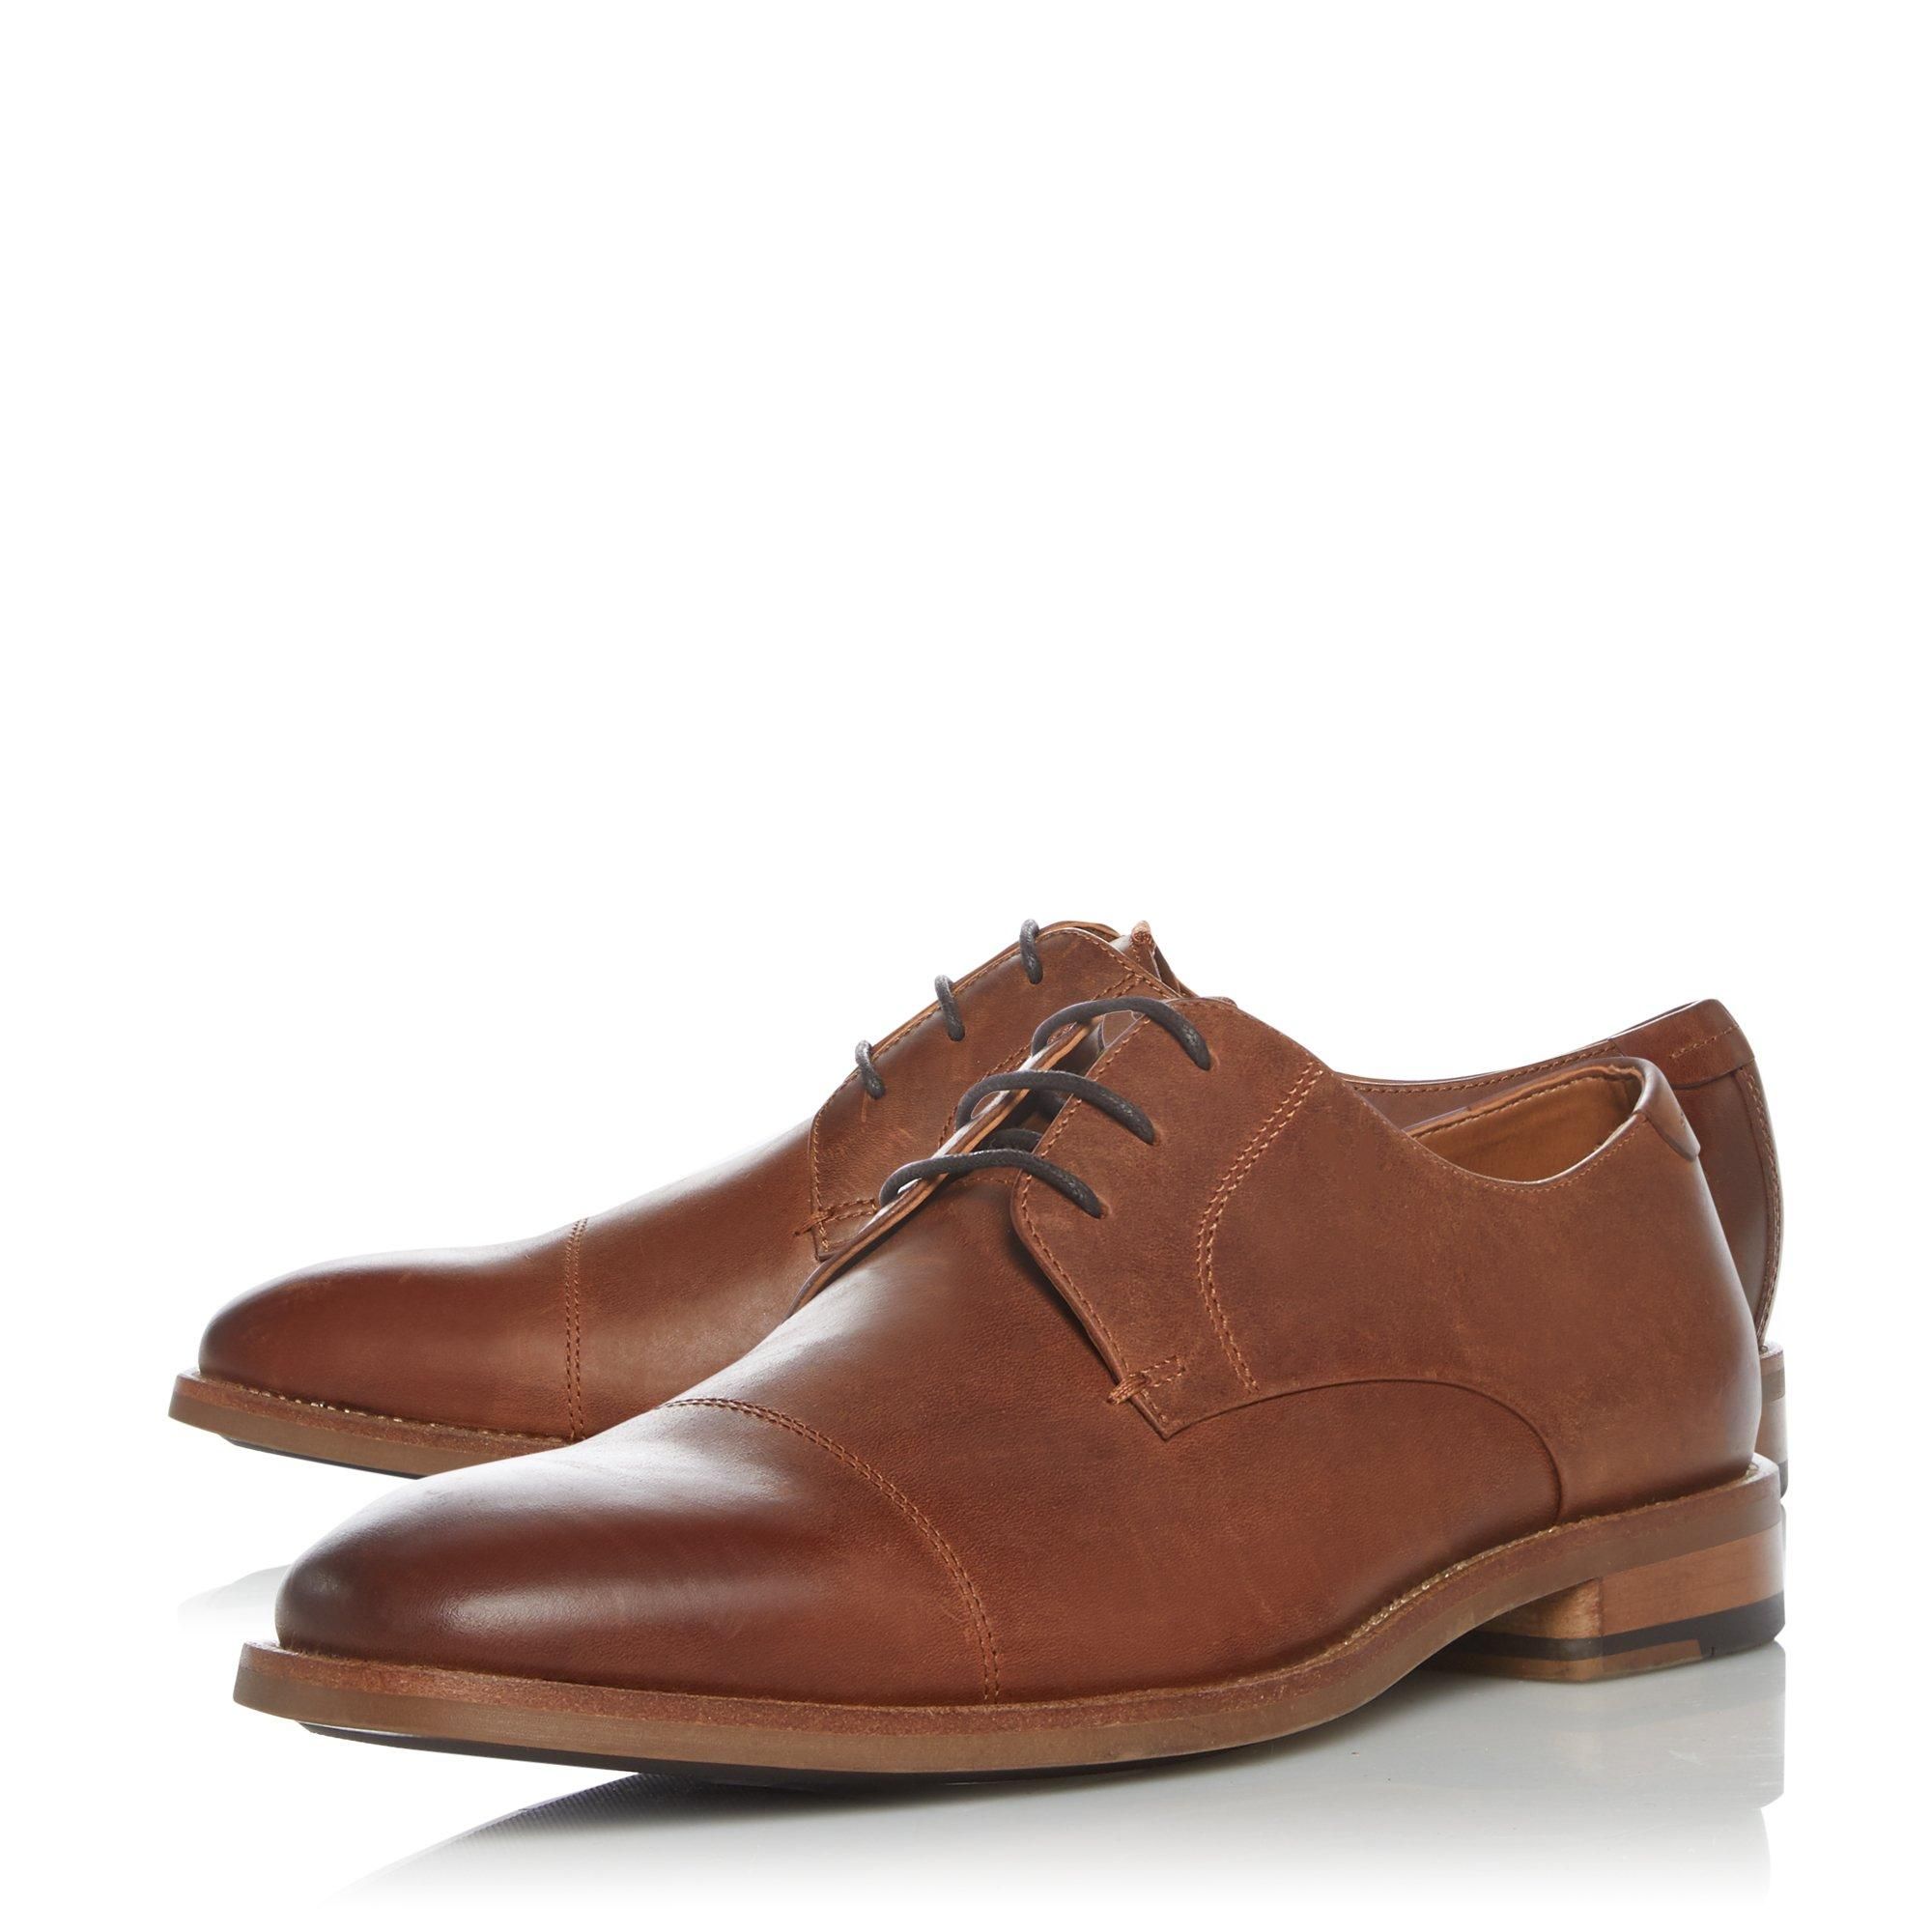 Polish your workwear wardrobe with the Balanced shoes from Dune London. With stitch detailing and a contrast lace up front. The worn leather look gives a contemporary finish.